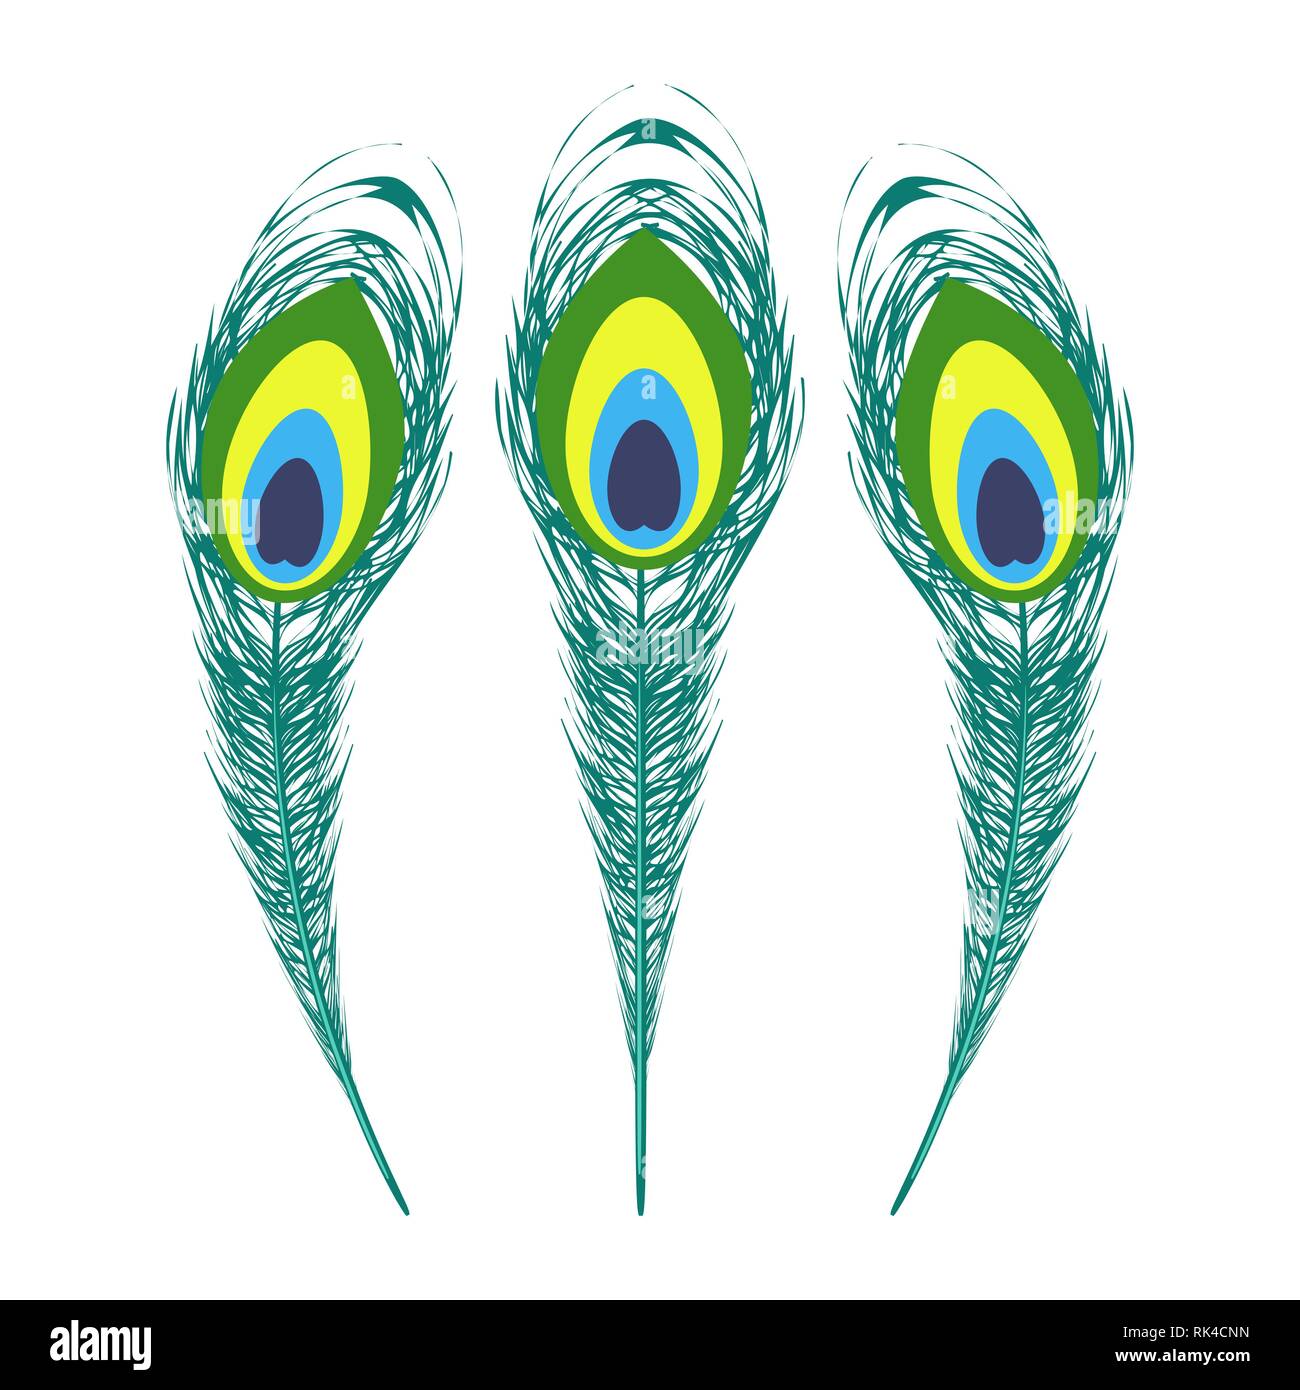 Set of Colorful Peacock Feathers. Stock Vector